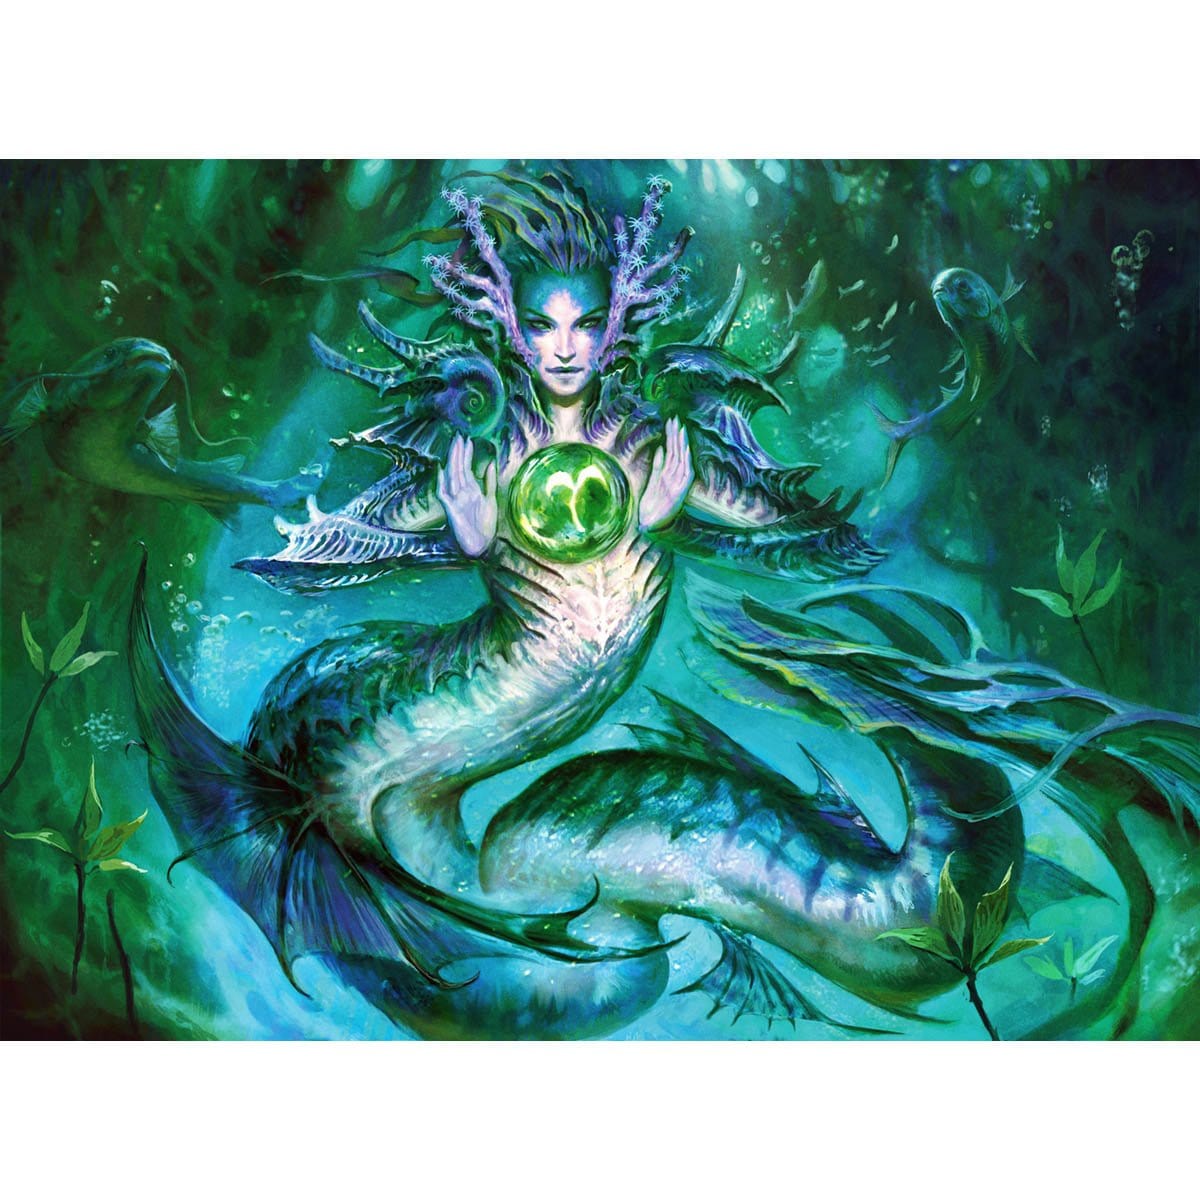 Tatyova, Benthic Druid Print - Print - Original Magic Art - Accessories for Magic the Gathering and other card games